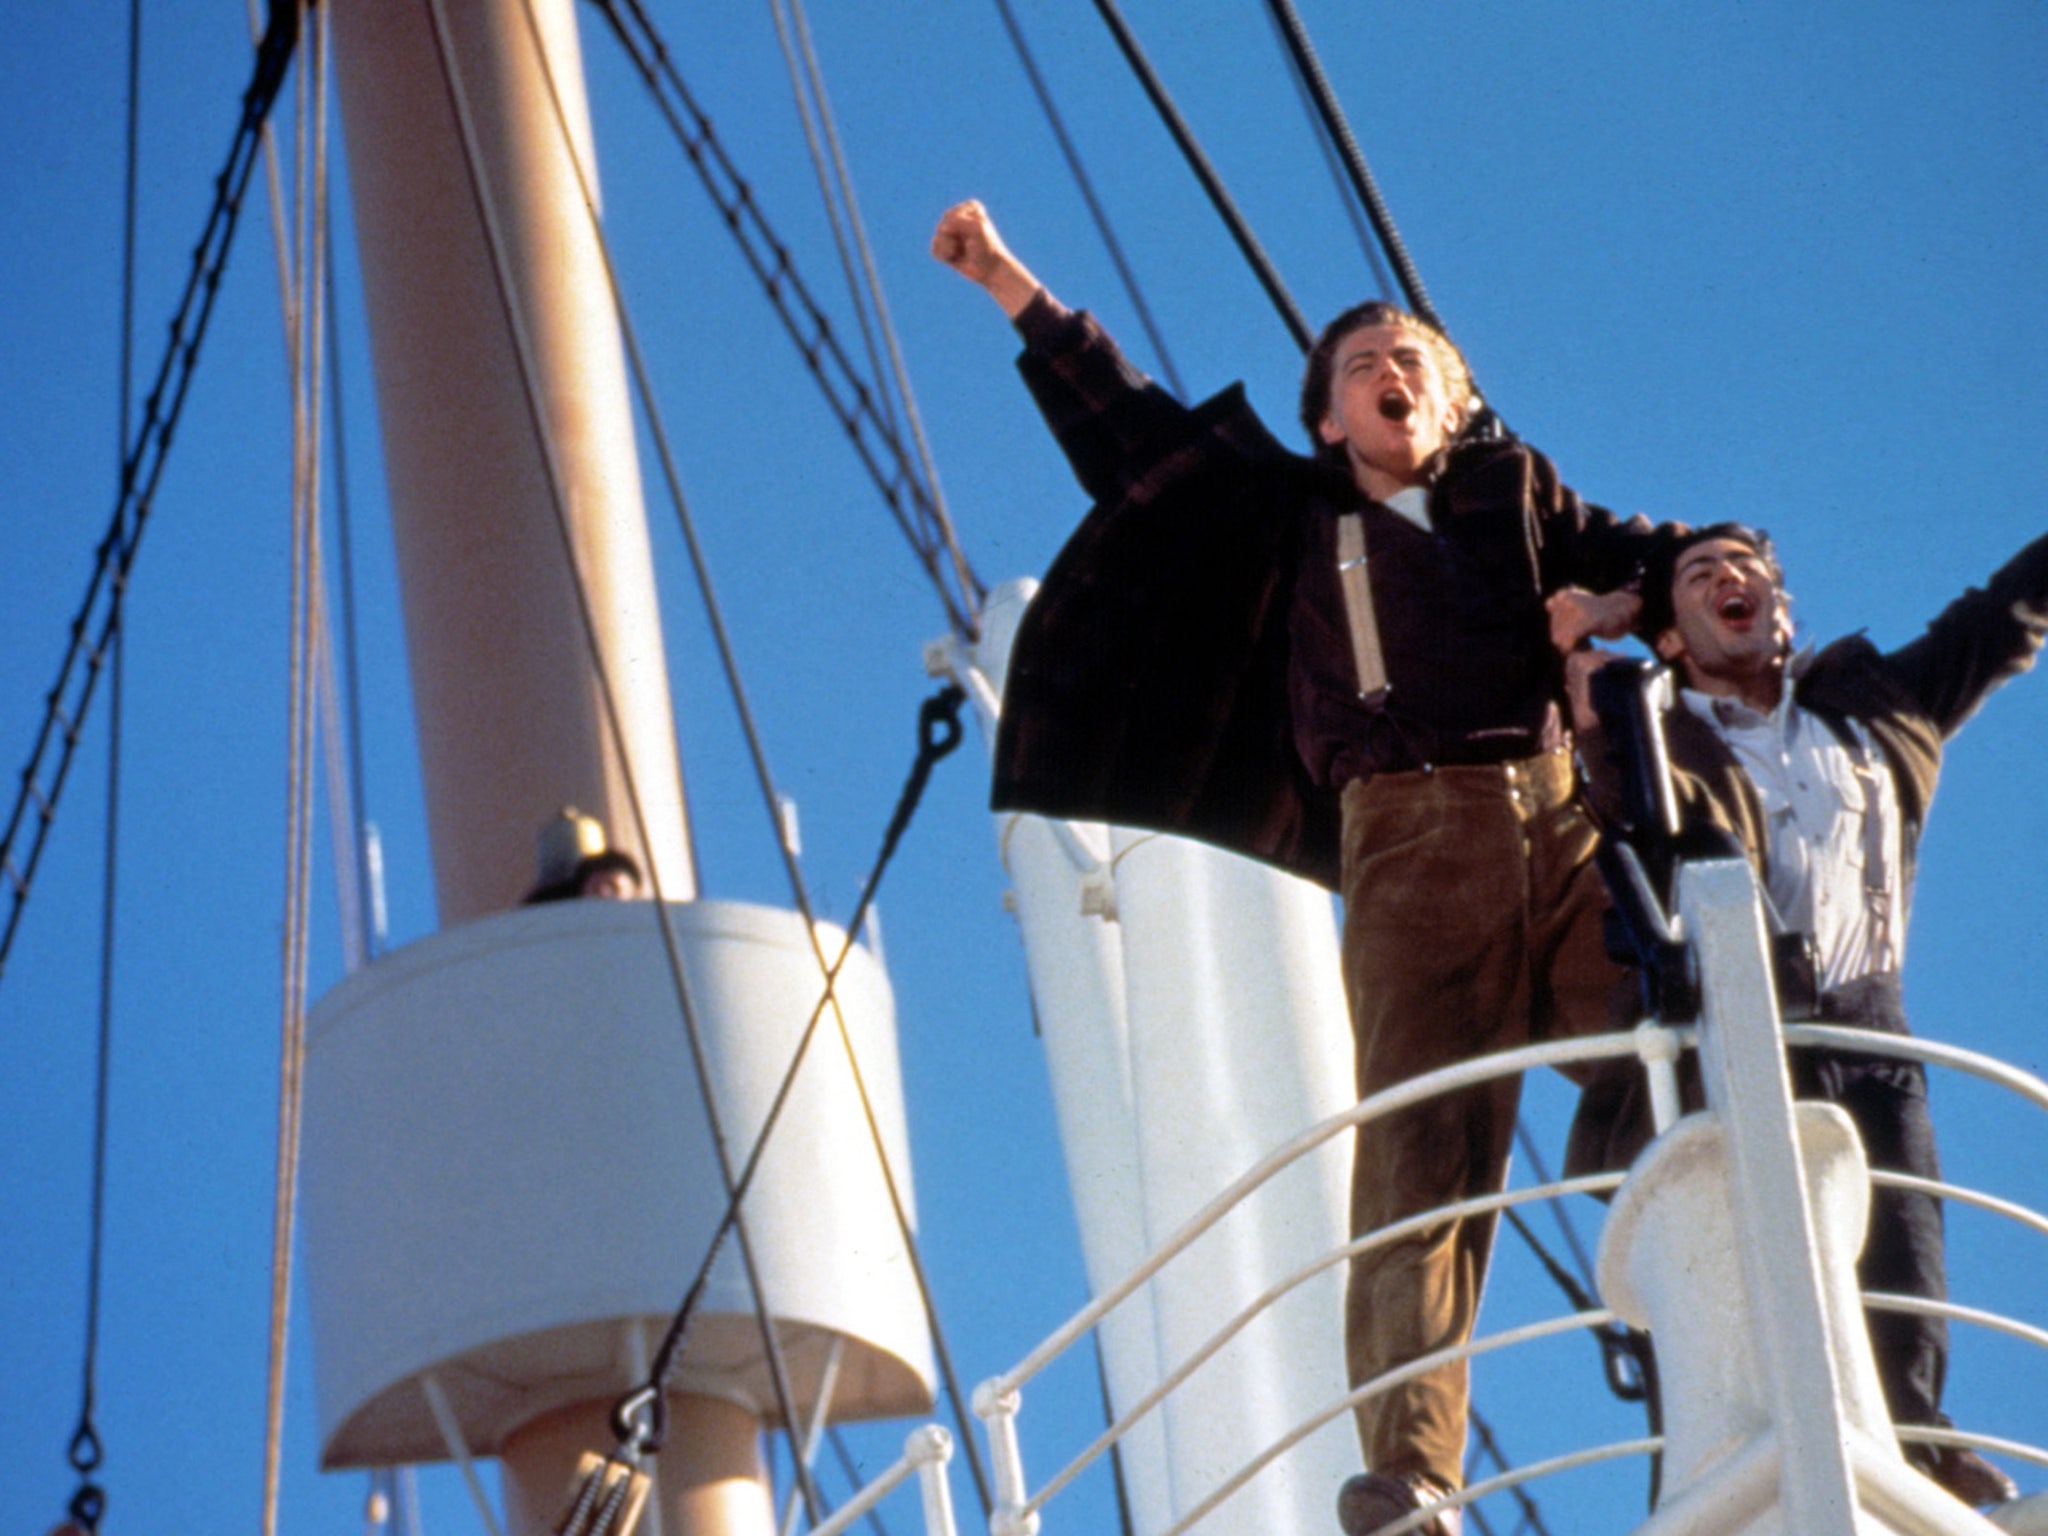 9 Reasons Why We'll Never Get Bored Of 'Titanic' - A Film That Resonates  With Every Generation